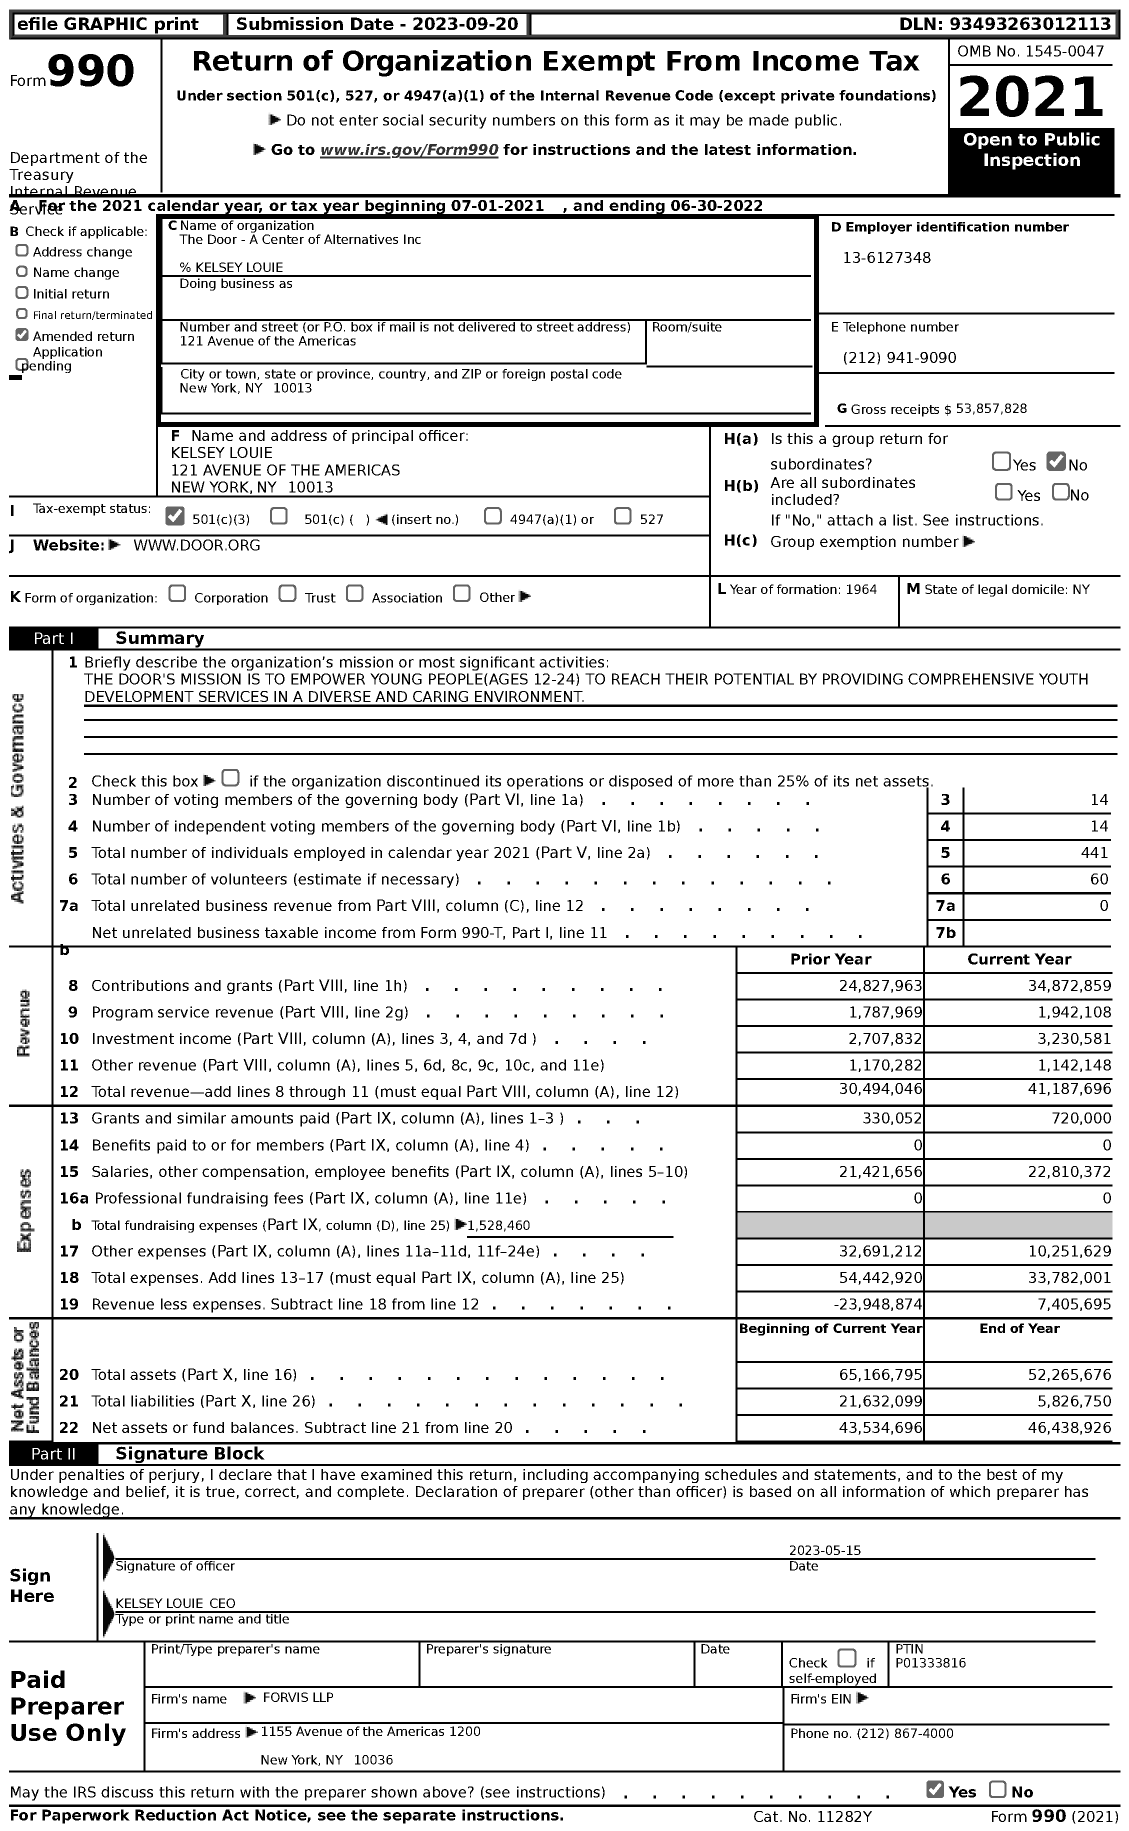 Image of first page of 2021 Form 990 for The Door - A Center of Alternatives